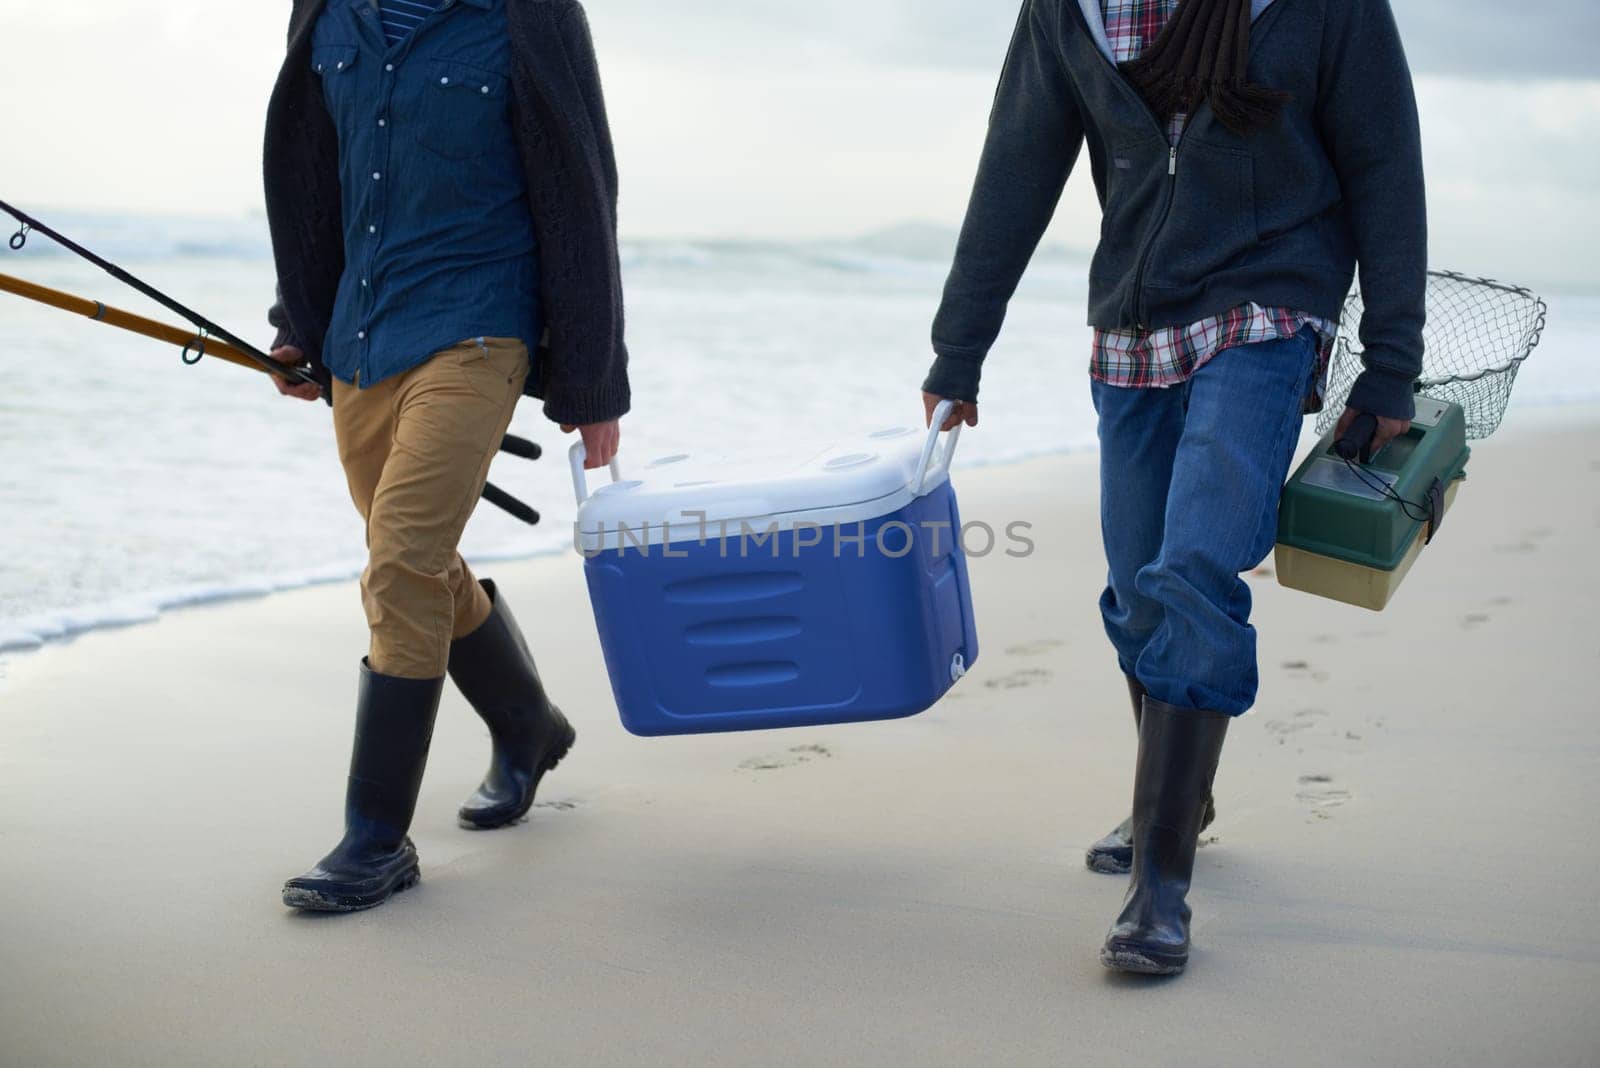 Carrying their tackle. Two fisherman carrying a cooler and a tackle box on the beach in the early morning